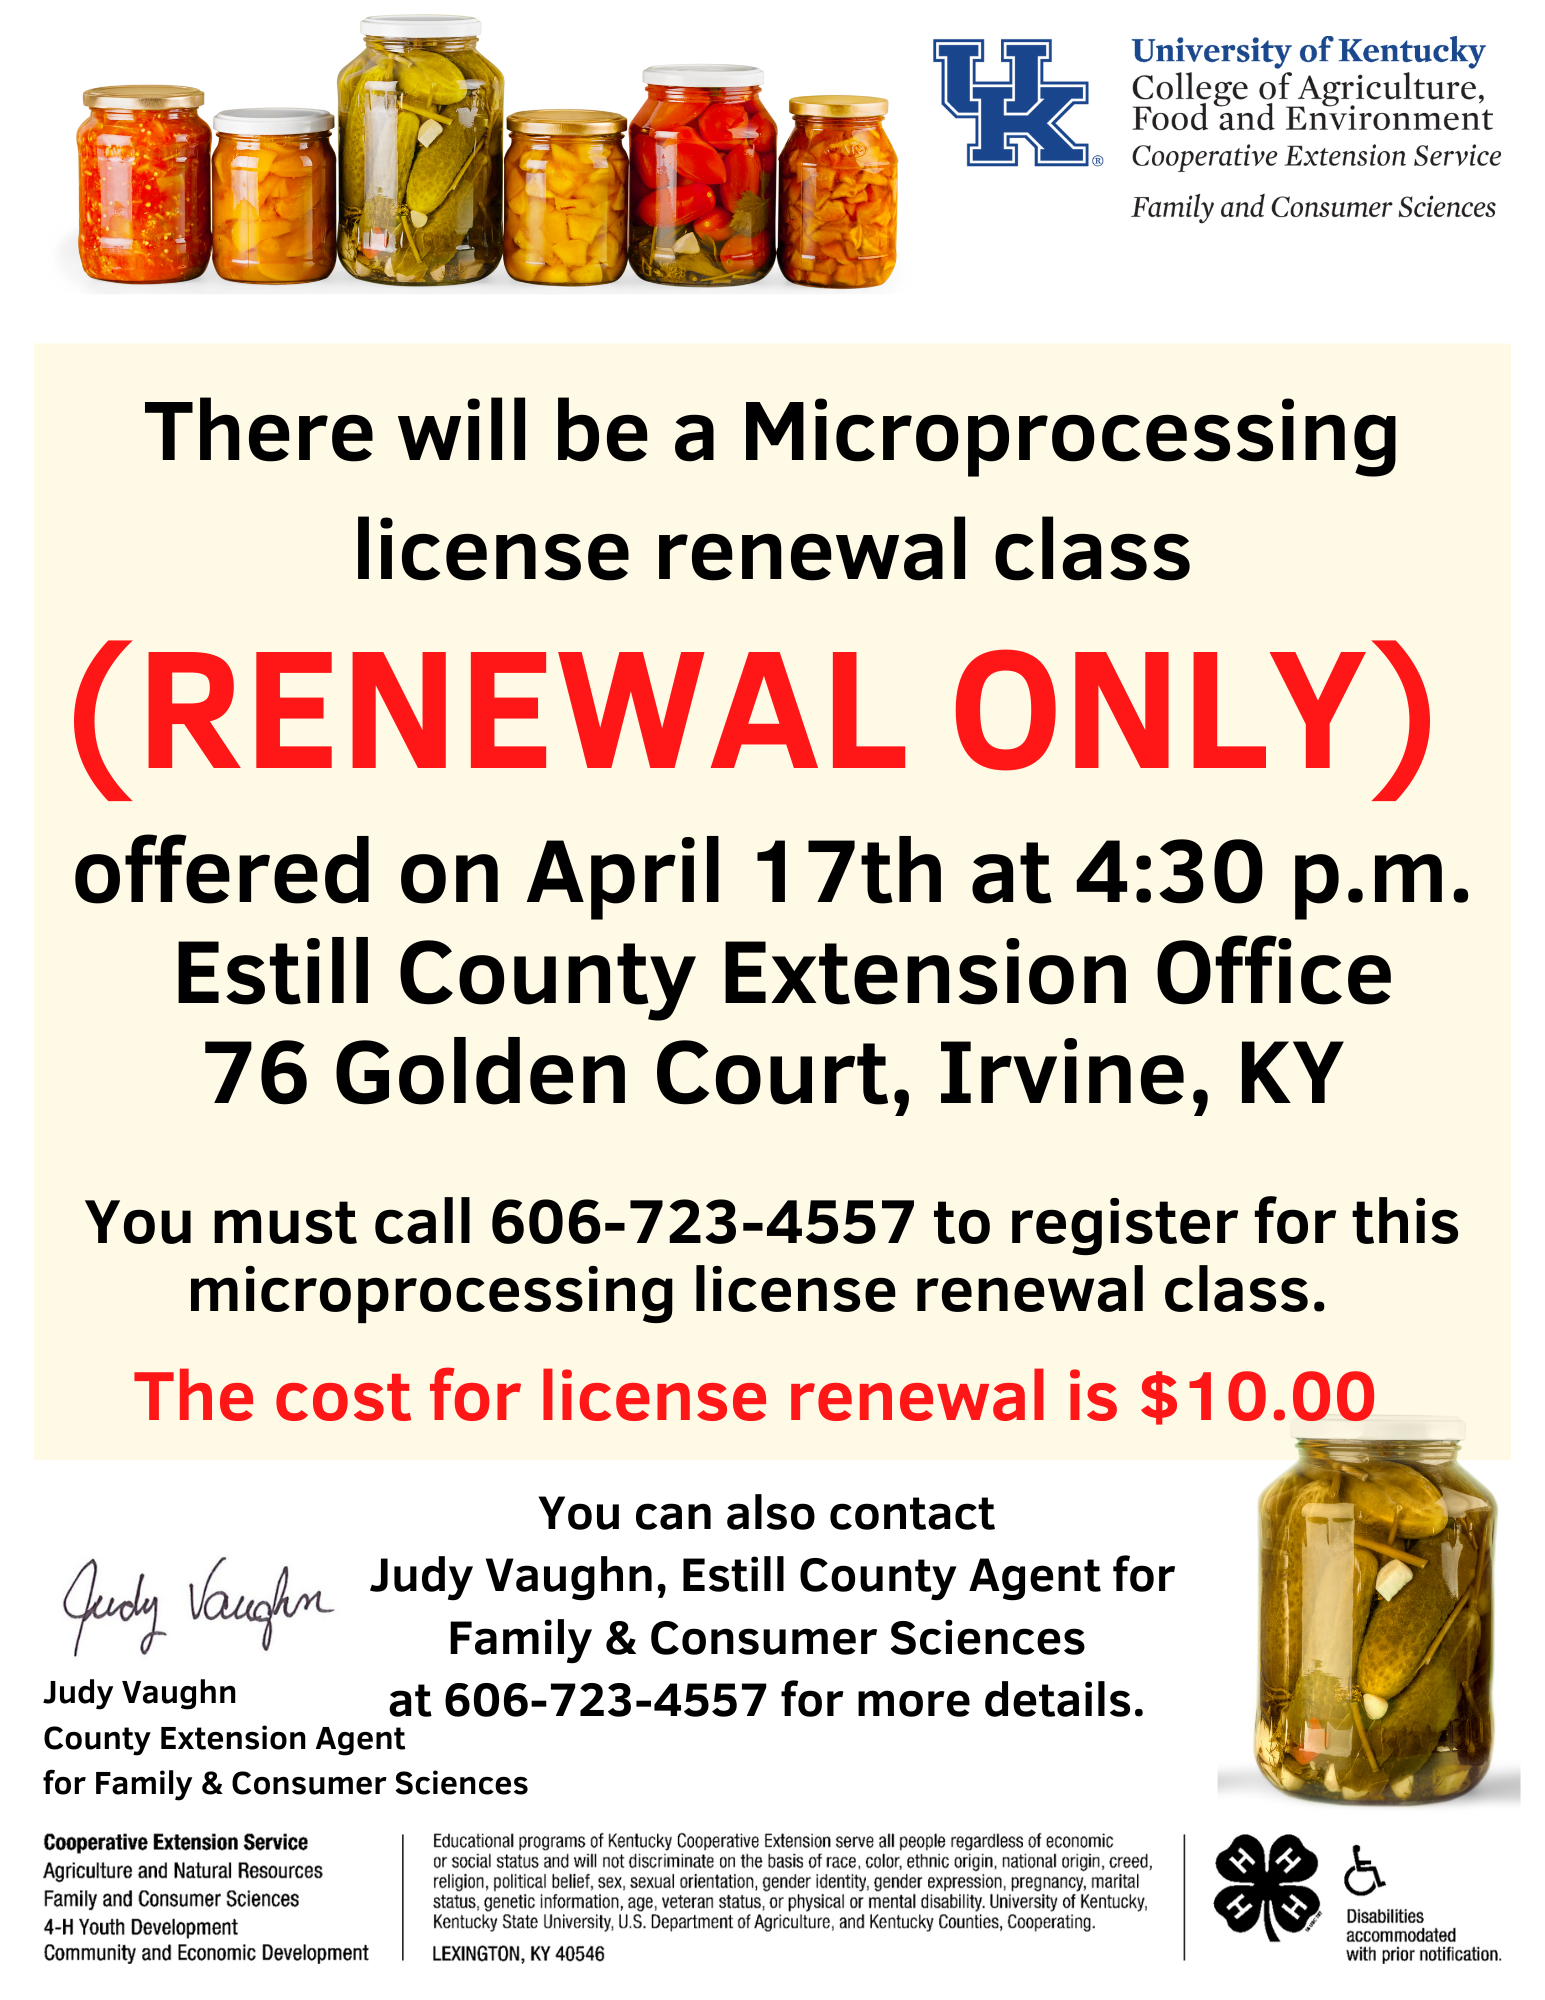 Microprocessing license renewal class will be April 17 at 4:30 flyer